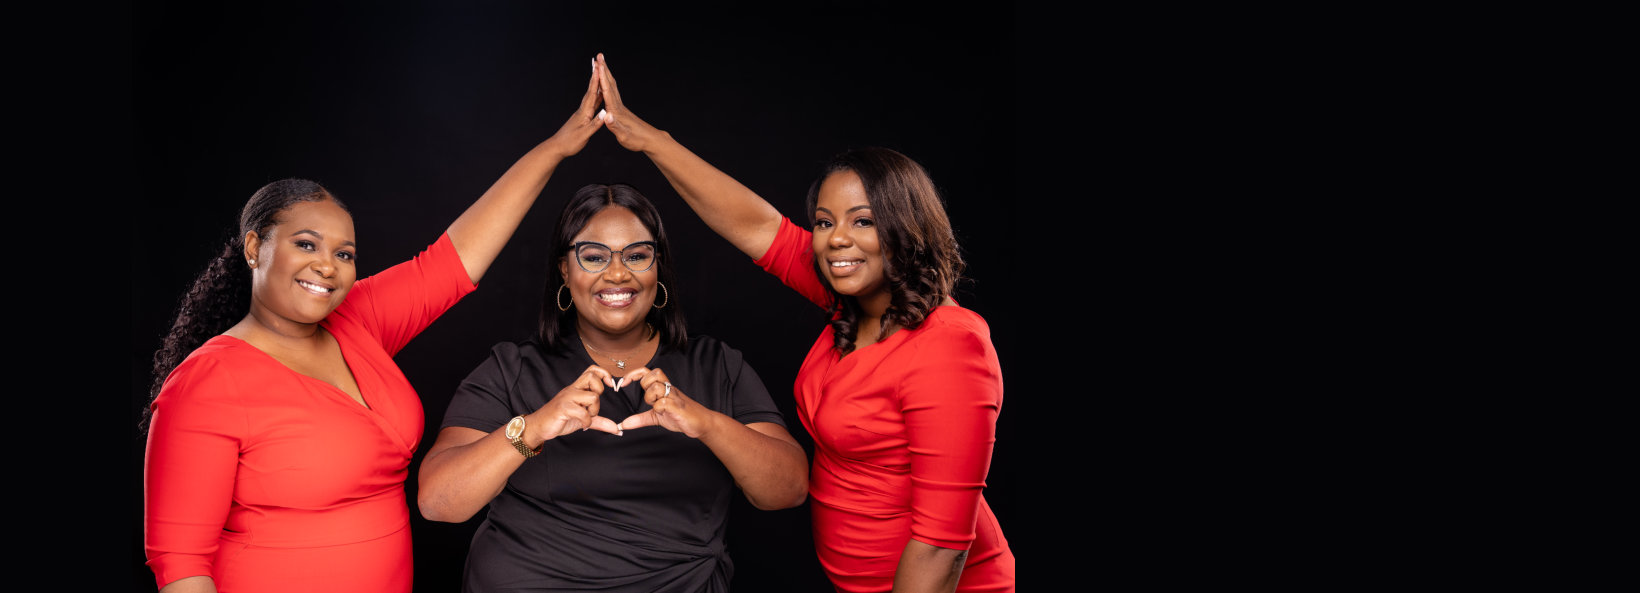 three women forming a triangle with a heart inside